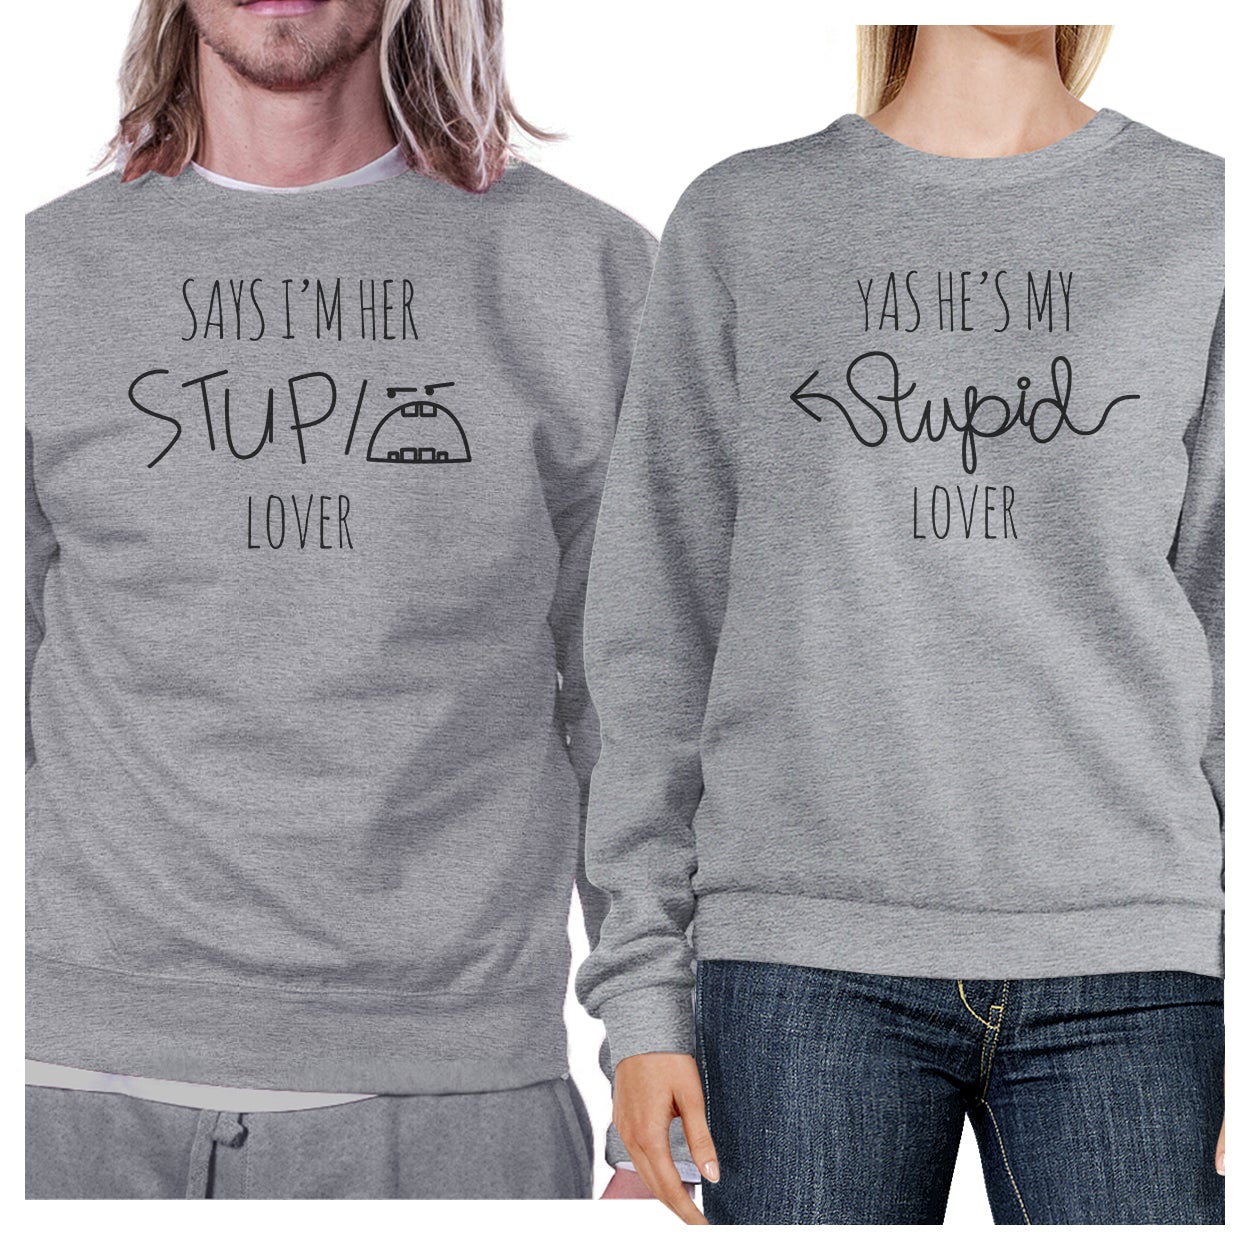 Her Stupid Lover And My Stupid Lover Matching Couple Grey Sweatshirts